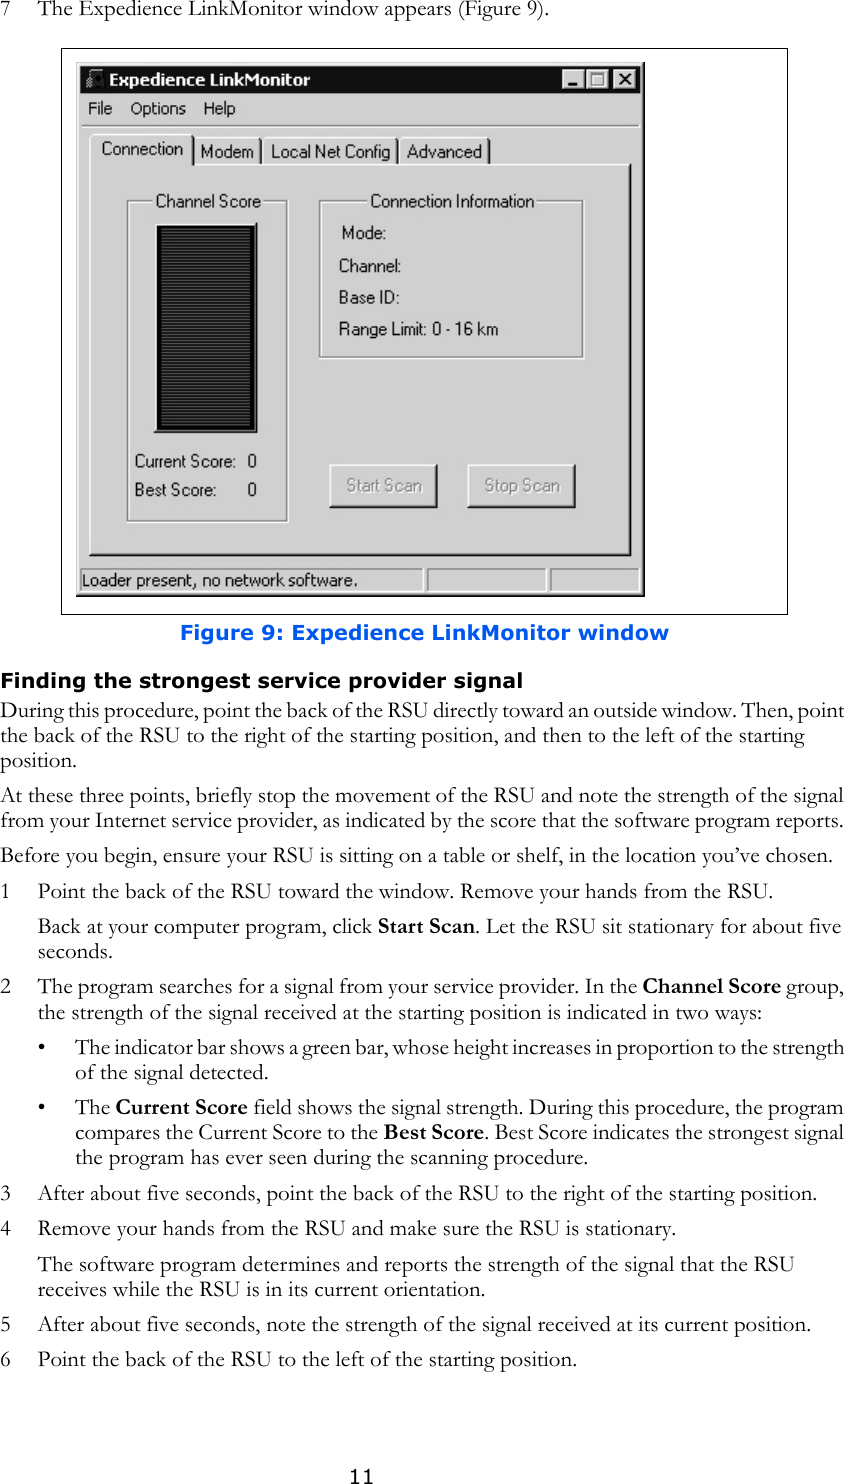 117 The Expedience LinkMonitor window appears (Figure 9).Finding the strongest service provider signal During this procedure, point the back of the RSU directly toward an outside window. Then, point the back of the RSU to the right of the starting position, and then to the left of the starting position. At these three points, briefly stop the movement of the RSU and note the strength of the signal from your Internet service provider, as indicated by the score that the software program reports. Before you begin, ensure your RSU is sitting on a table or shelf, in the location you’ve chosen. 1 Point the back of the RSU toward the window. Remove your hands from the RSU.Back at your computer program, click Start Scan. Let the RSU sit stationary for about five seconds. 2 The program searches for a signal from your service provider. In the Channel Score group, the strength of the signal received at the starting position is indicated in two ways:• The indicator bar shows a green bar, whose height increases in proportion to the strength of the signal detected. •The Current Score field shows the signal strength. During this procedure, the program compares the Current Score to the Best Score. Best Score indicates the strongest signal the program has ever seen during the scanning procedure.3 After about five seconds, point the back of the RSU to the right of the starting position.4 Remove your hands from the RSU and make sure the RSU is stationary.The software program determines and reports the strength of the signal that the RSU receives while the RSU is in its current orientation.5 After about five seconds, note the strength of the signal received at its current position.6 Point the back of the RSU to the left of the starting position. Figure 9: Expedience LinkMonitor window